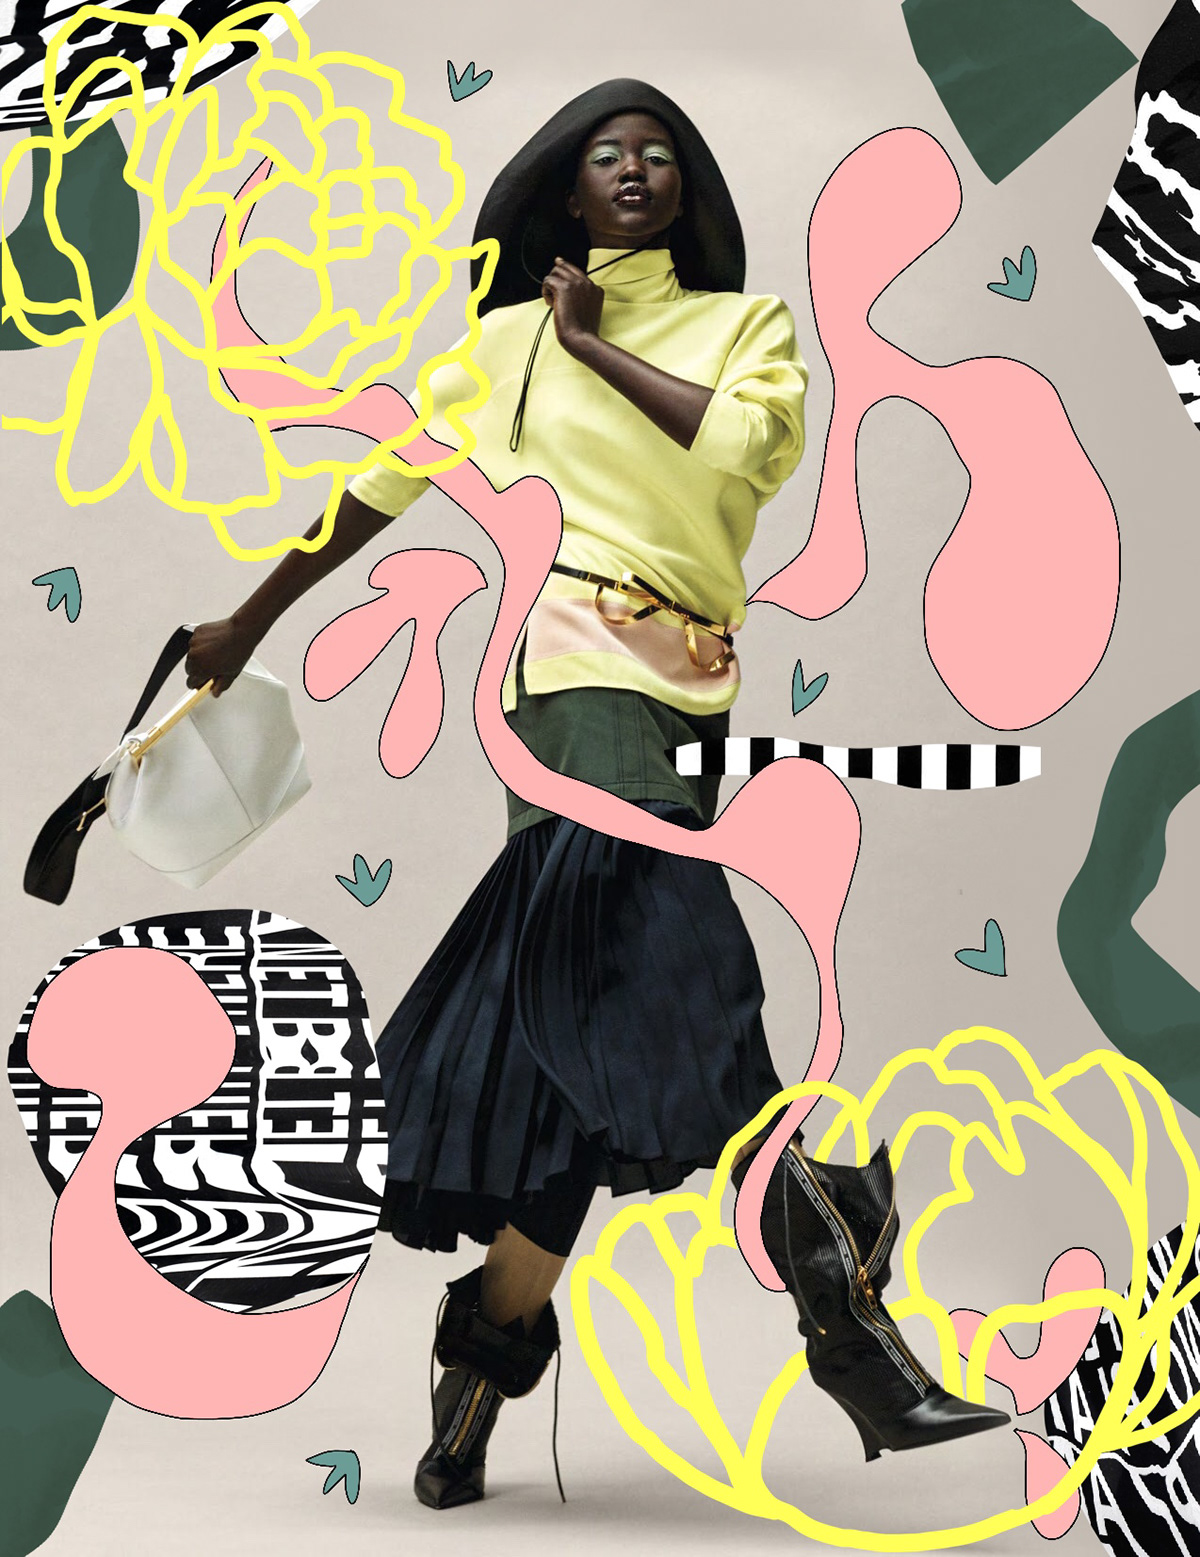 editorial Fashion campaign fashion illustration florals key visual mixed media strong women typography   Women empowering